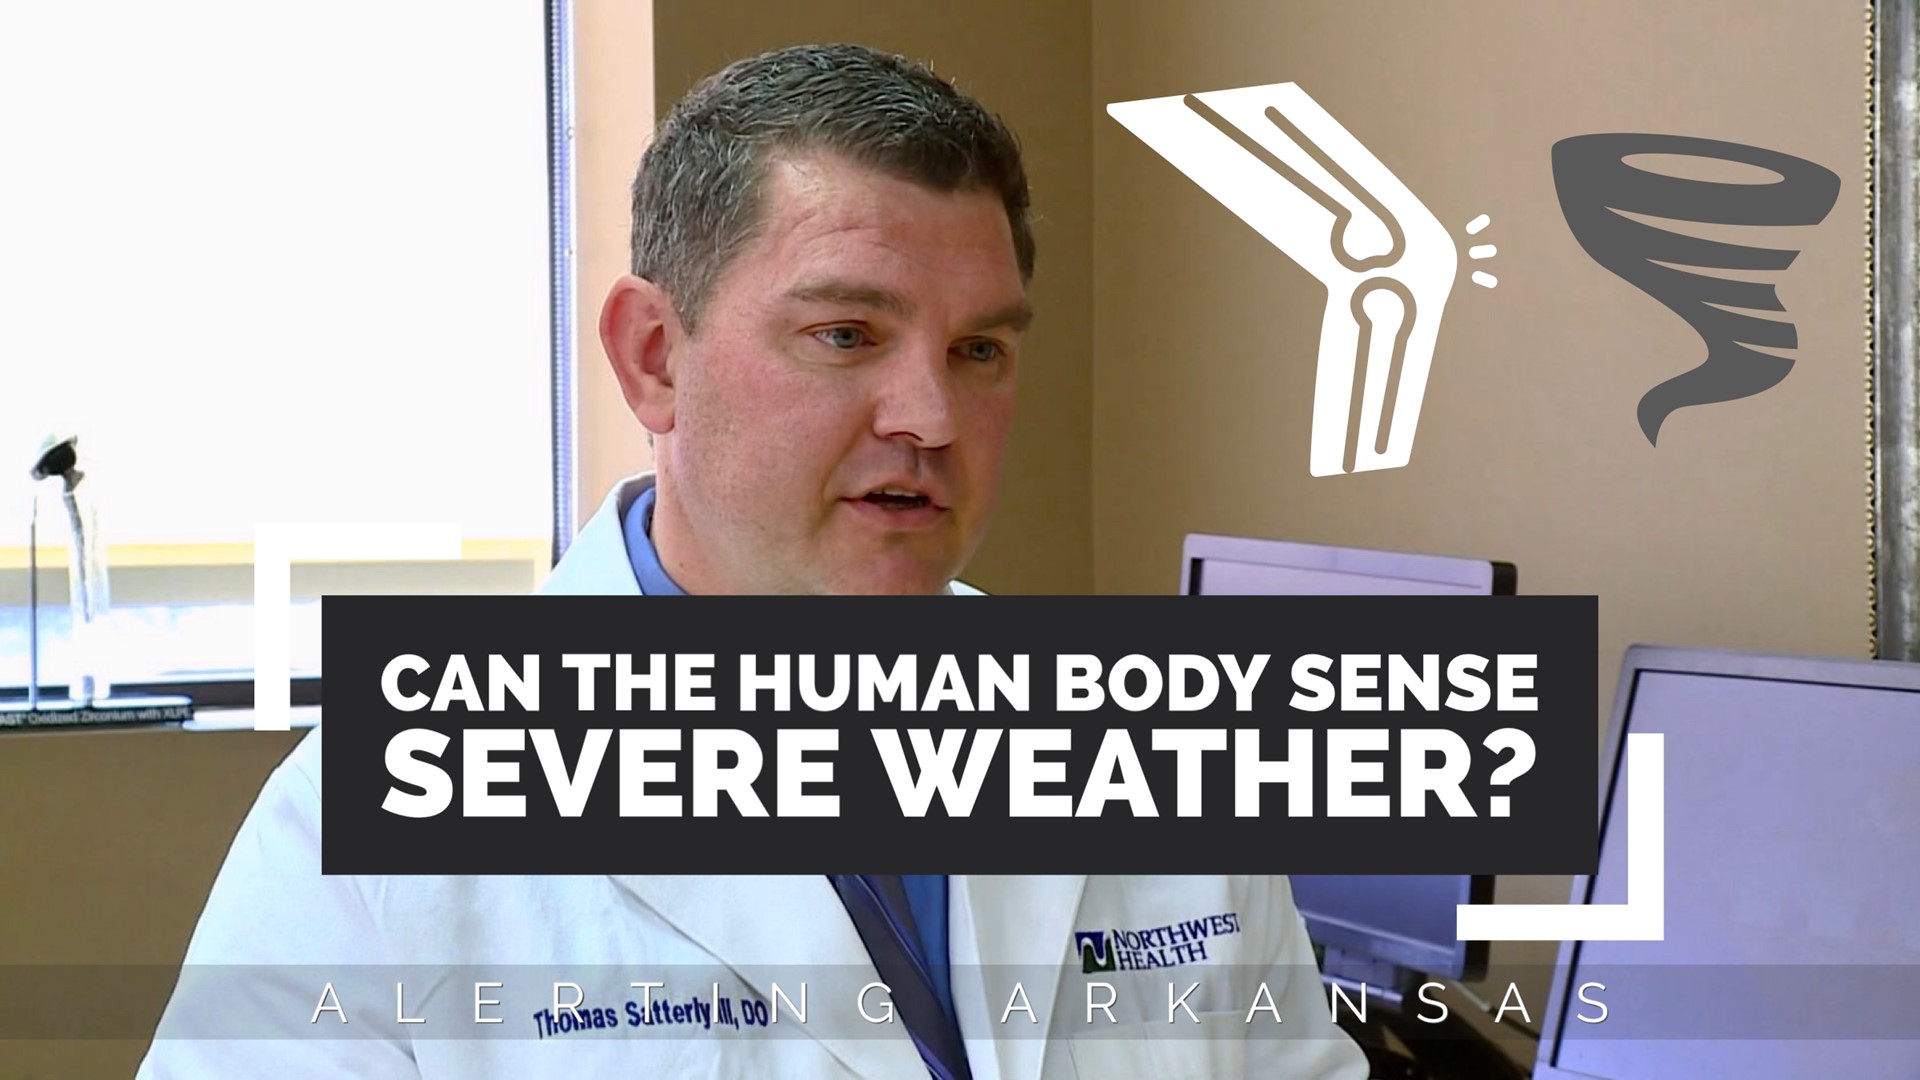 Many say that aches and pains in their joints act up when the weather is about to get bad. Does science back this up? Our weather team investigates.